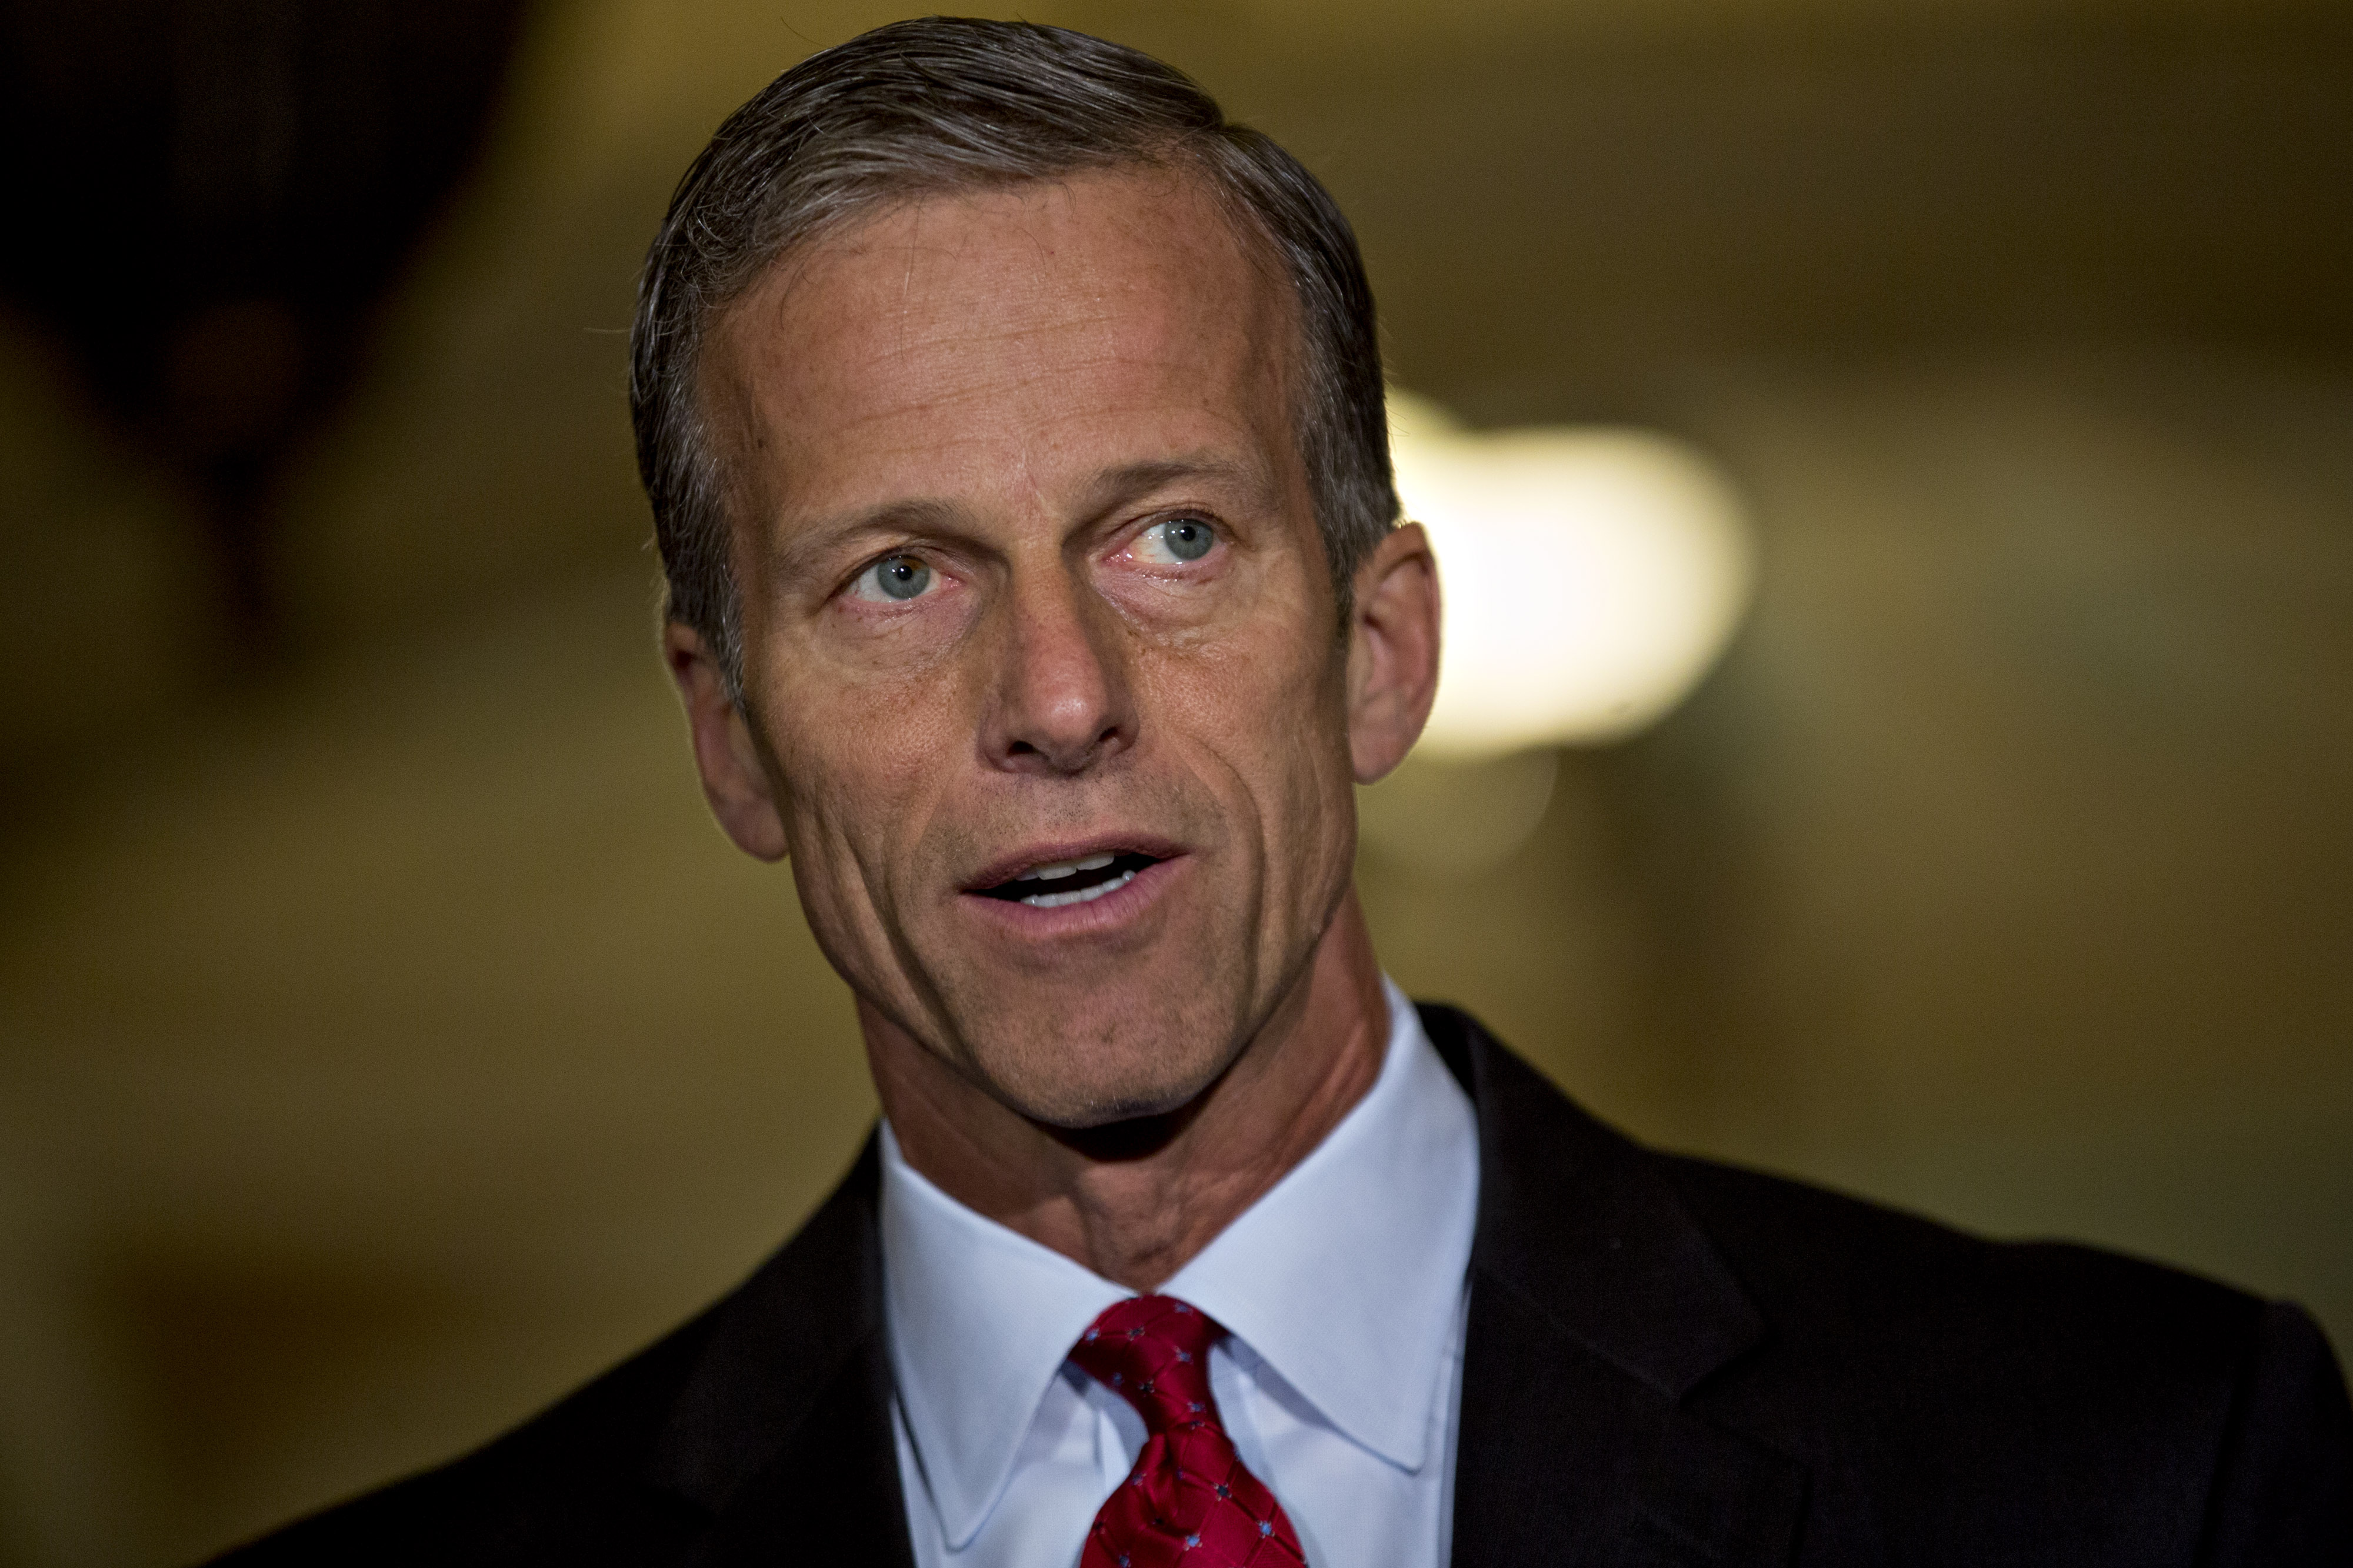 Sen. John Thune, a Republican from South Dakota, speaks to members of the media after a Senate luncheon meeting at the U.S. Capitol in Washington, D.C., on May 10. (Andrew Harrer—Bloomberg/Getty Images)